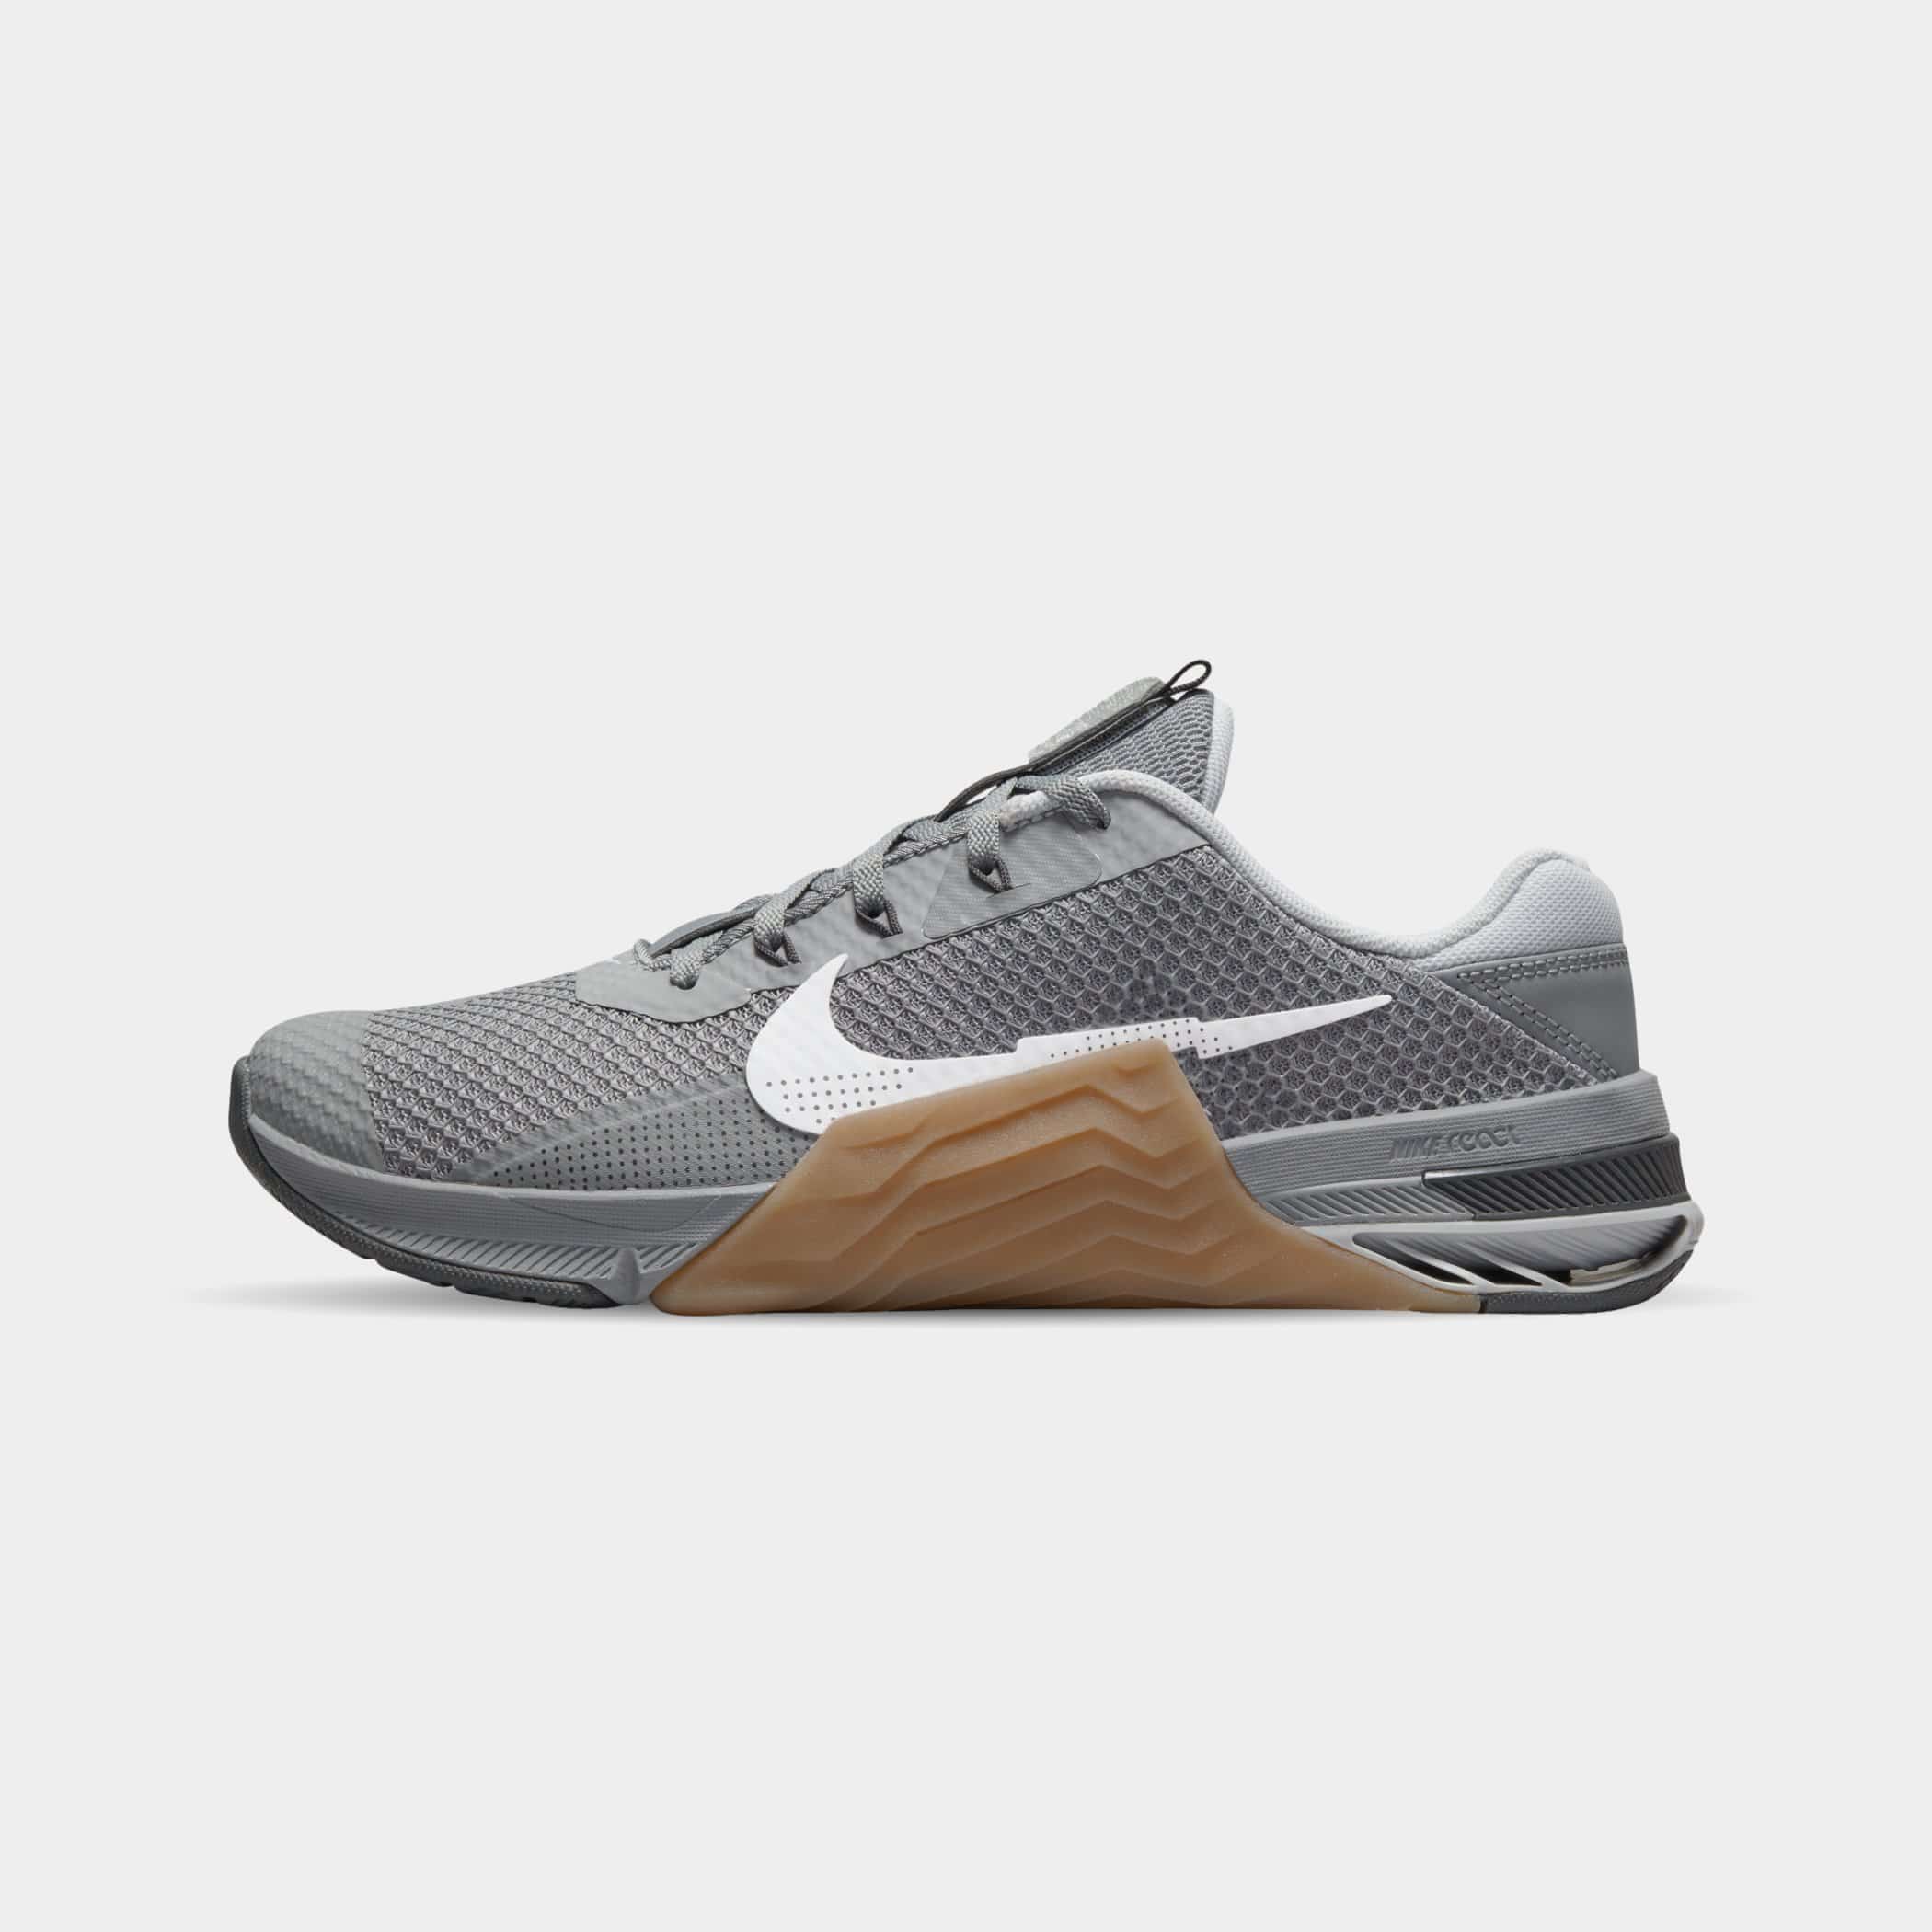 persona Regularmente Subproducto Nike Metcon 7 Men's Training Shoes in Grey - WIT Fitness